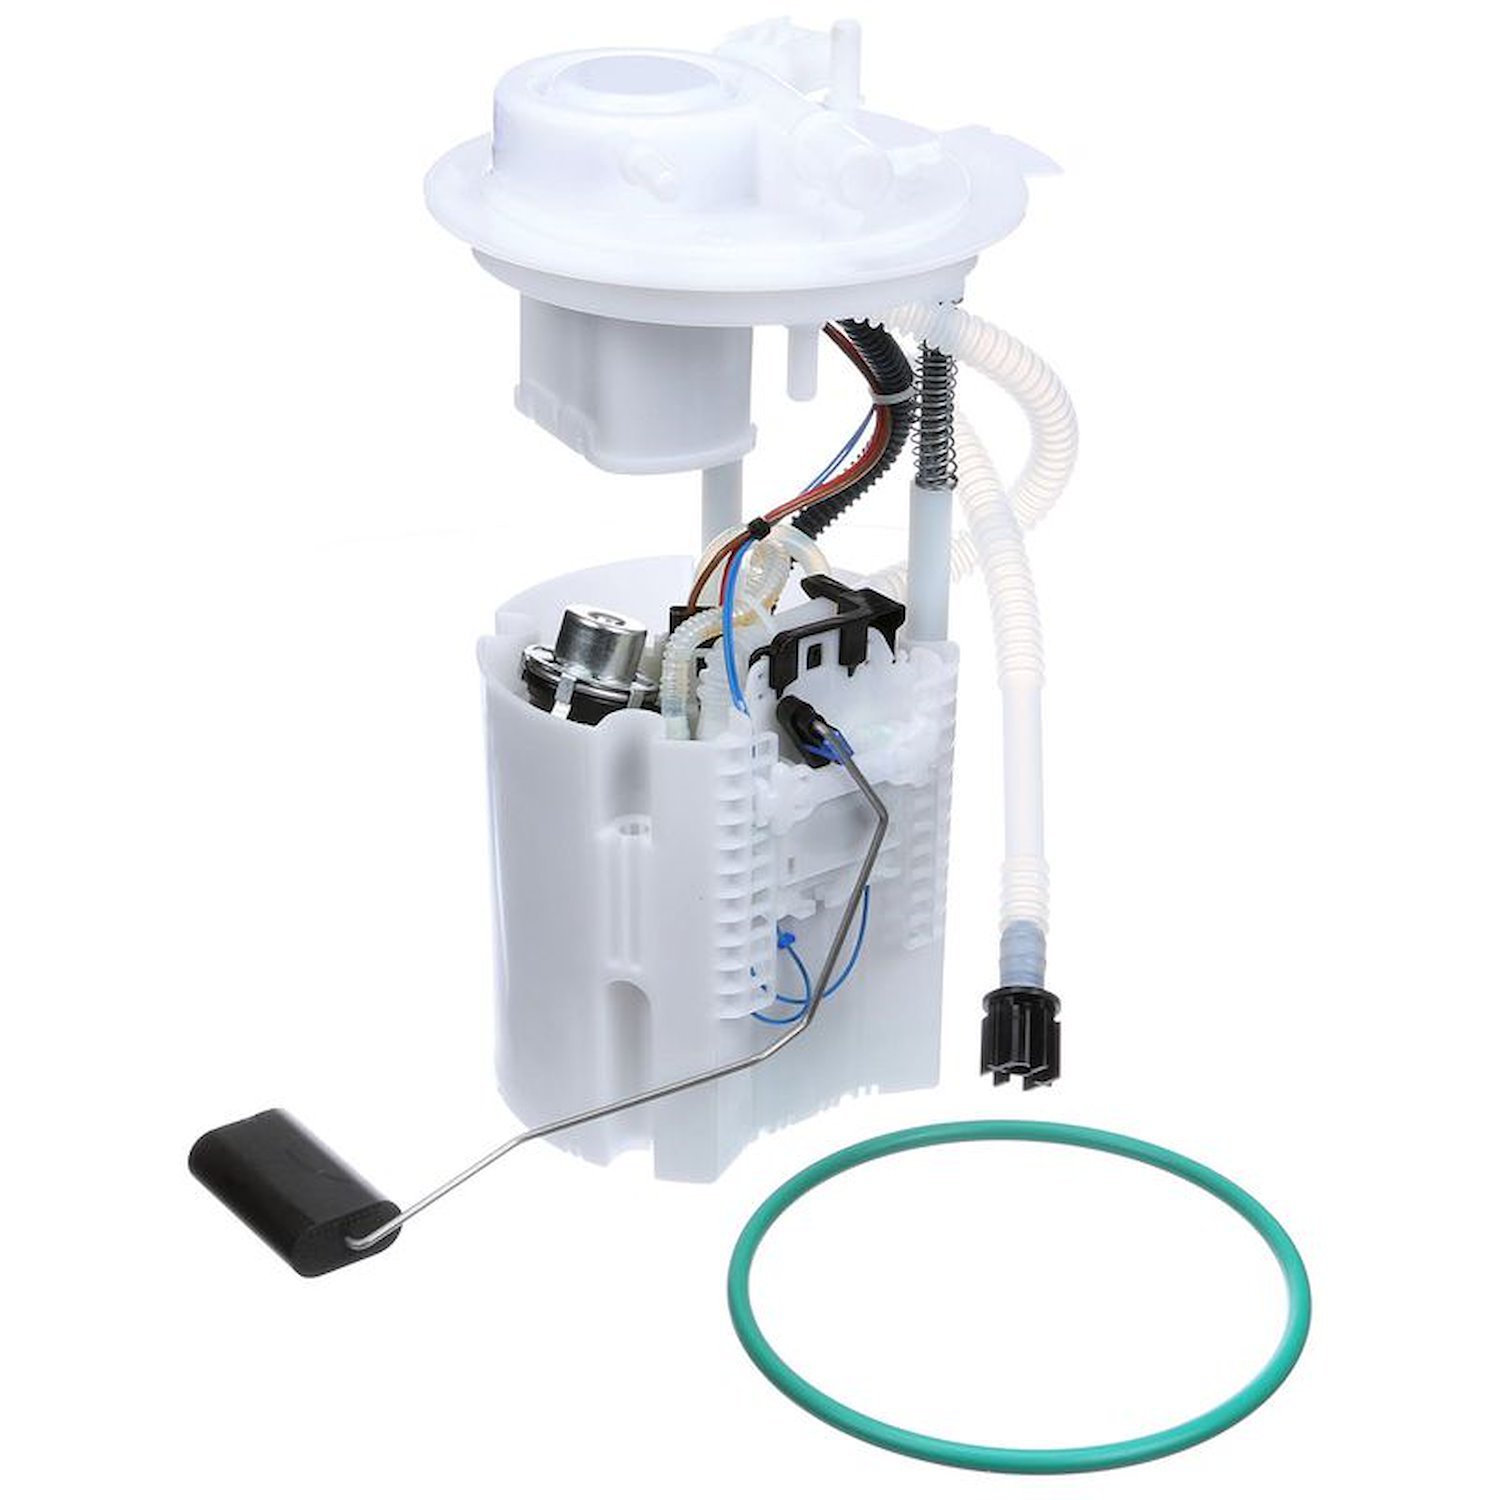 OE Chrysler/Dodge/Jeep Replacement Fuel Pump Module Assembly for 2014-2017 Jeep Cherokee